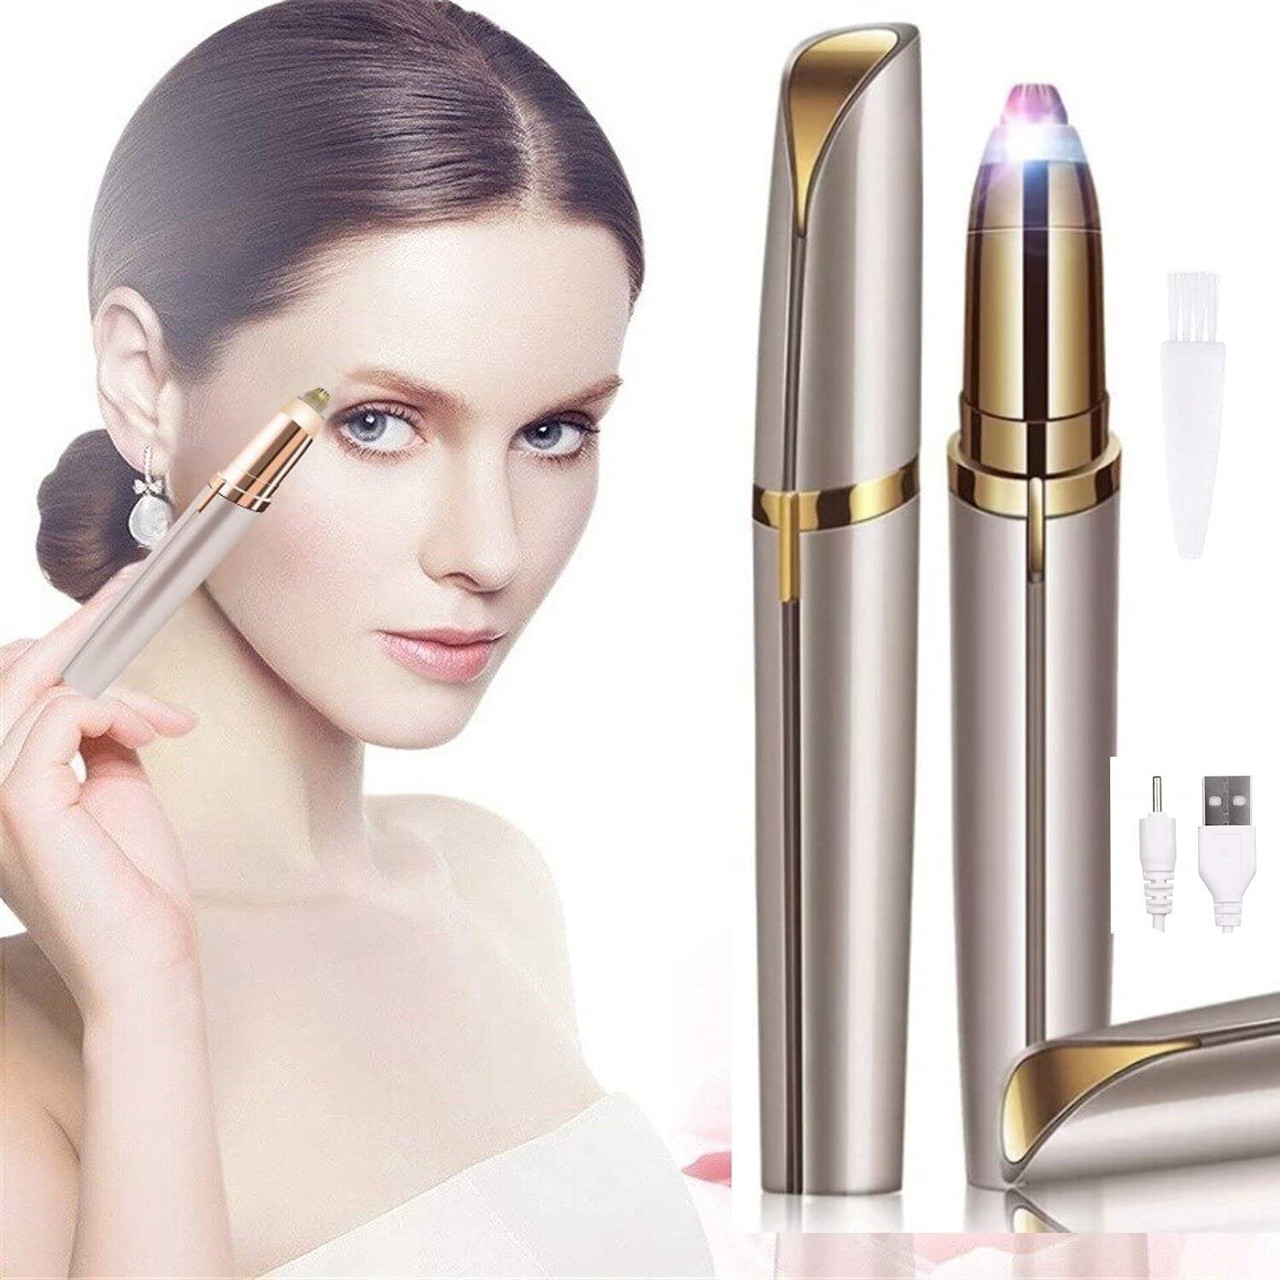 Antique Mini Eyebrow Trimmer 2 in 1 Face Hair Remover with Replaceable  Heads Painless Personal Hair Removal Eyebrow Razor Flawless Brows Electric  Eyebrow Razor Pen Painless Makeup Face Epilator  DukanIndia